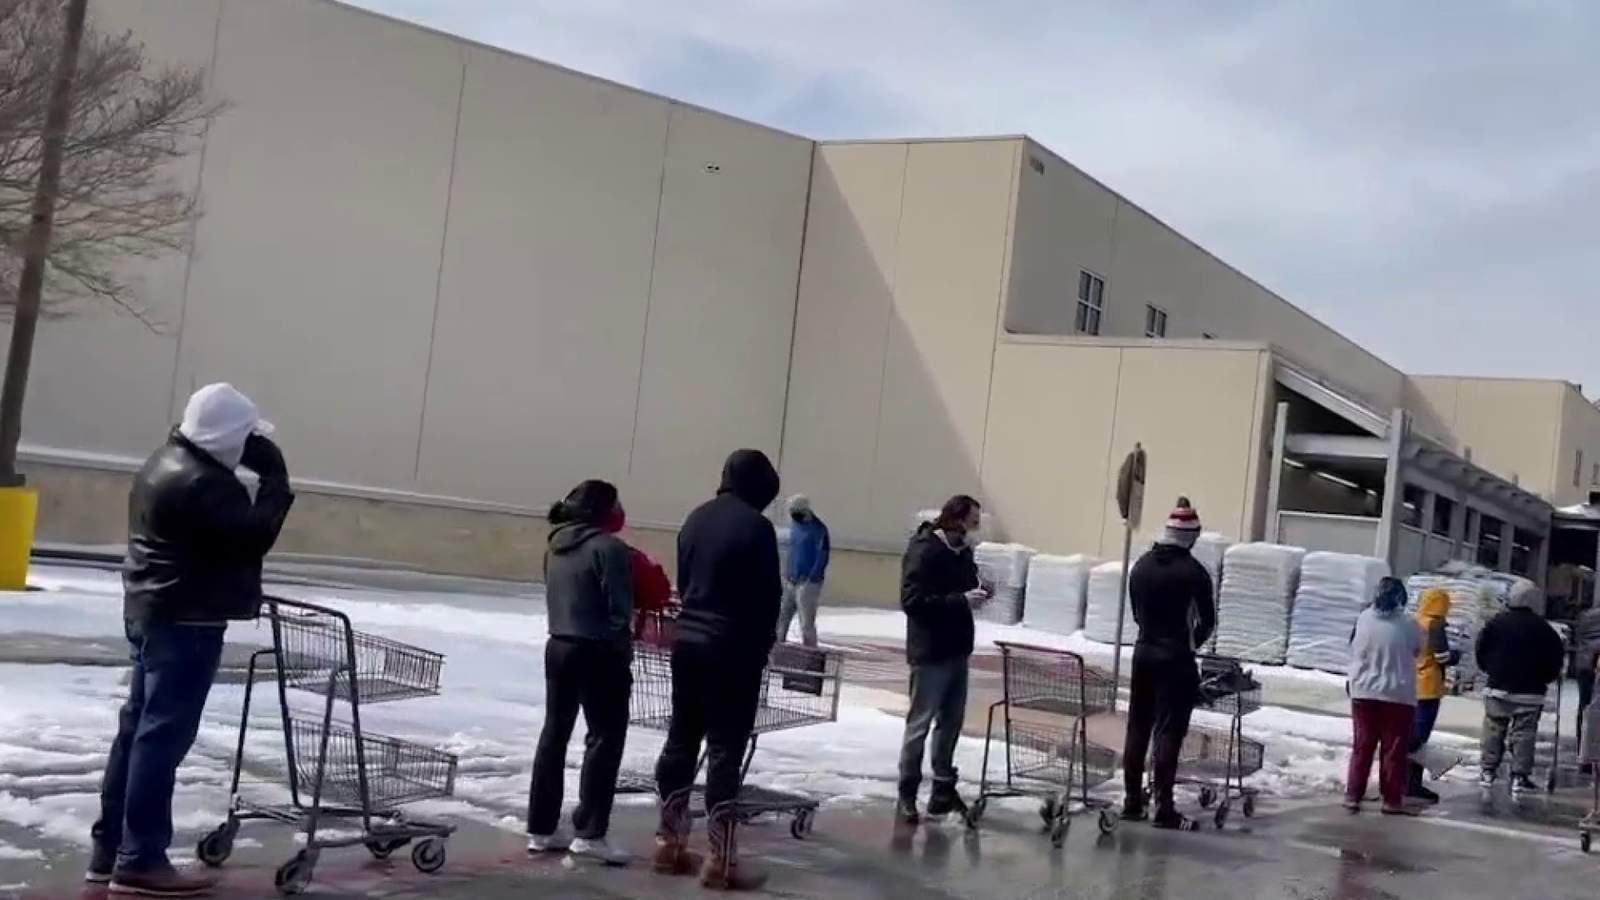 Thousands across San Antonio wait in cold for dwindling supplies at H-E-B, Lowes locations